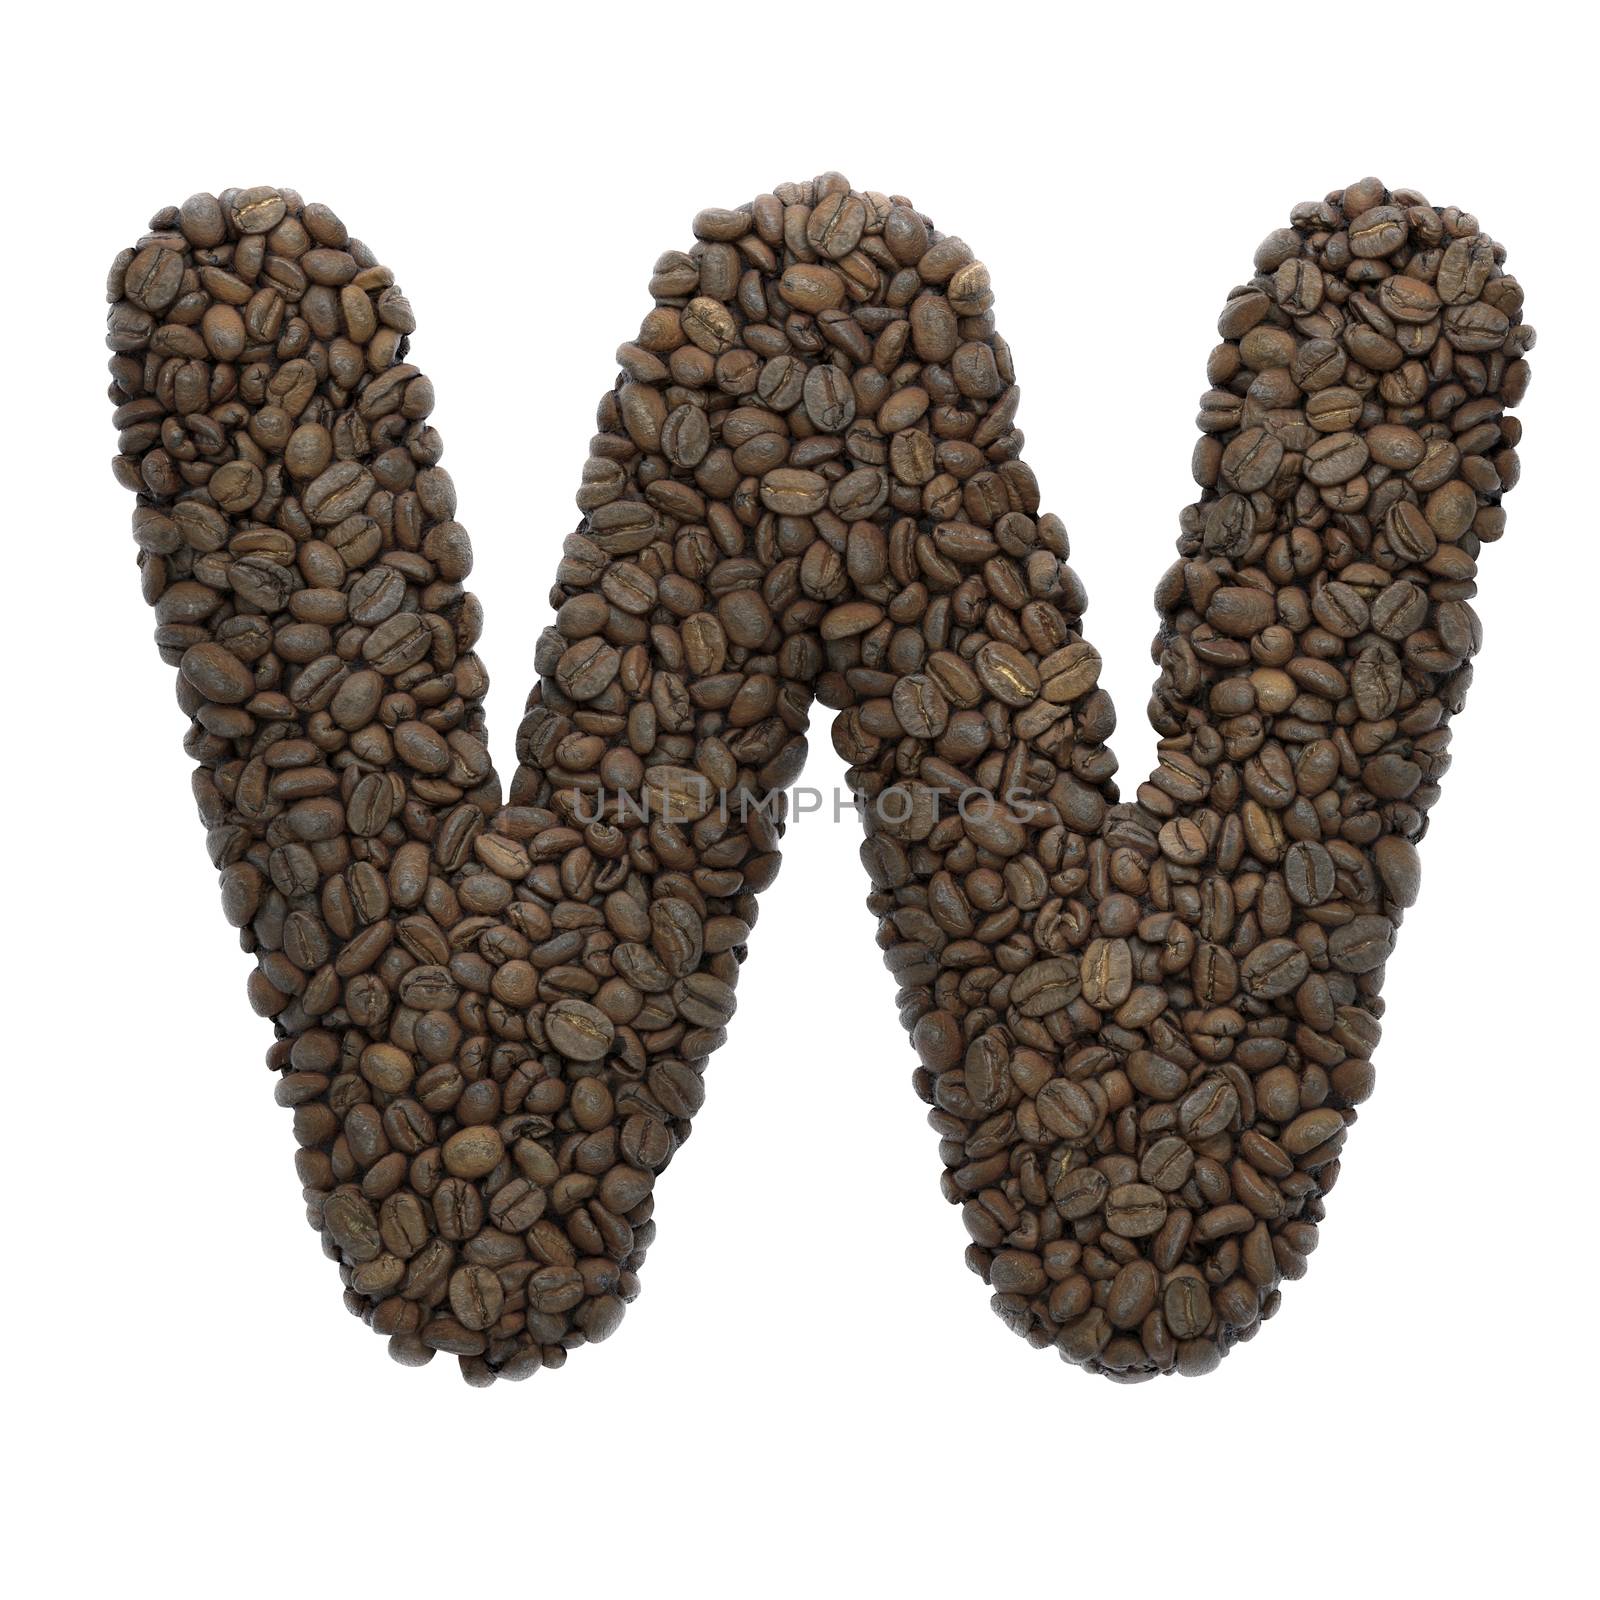 Coffee letter W - Uppercase 3d roasted beans font isolated on white background. This alphabet is perfect for creative illustrations related but not limited to Coffee, energy, insomnia...